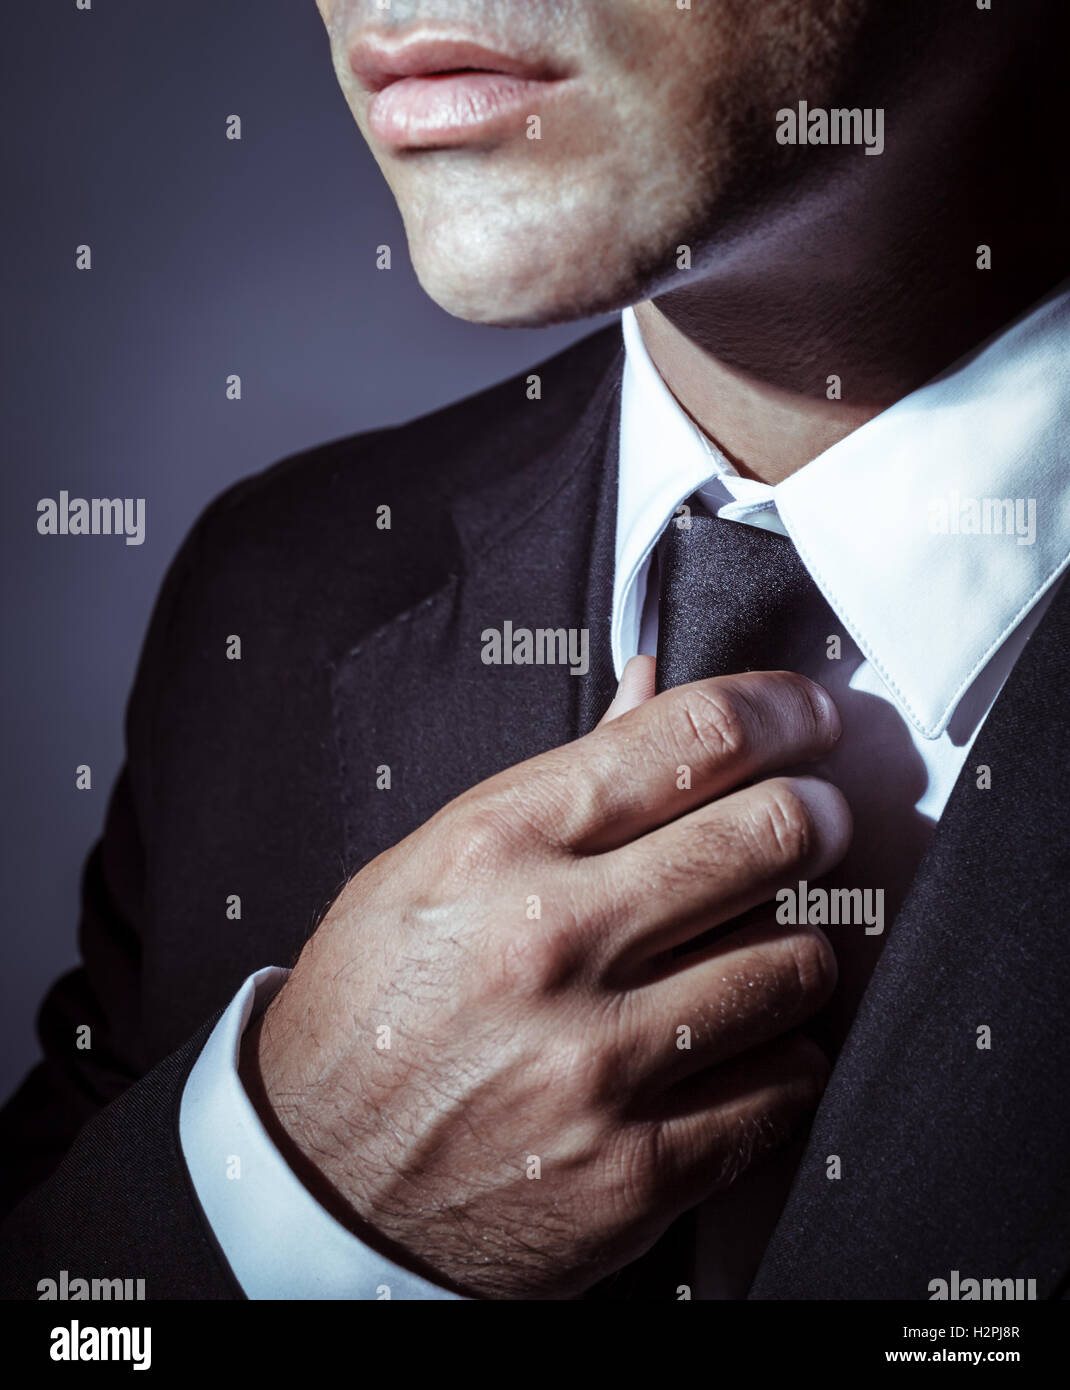 Closeup photo of a serious businessman wearing stylish black suit and tie over dark background, face part, mens wear fashion Stock Photo